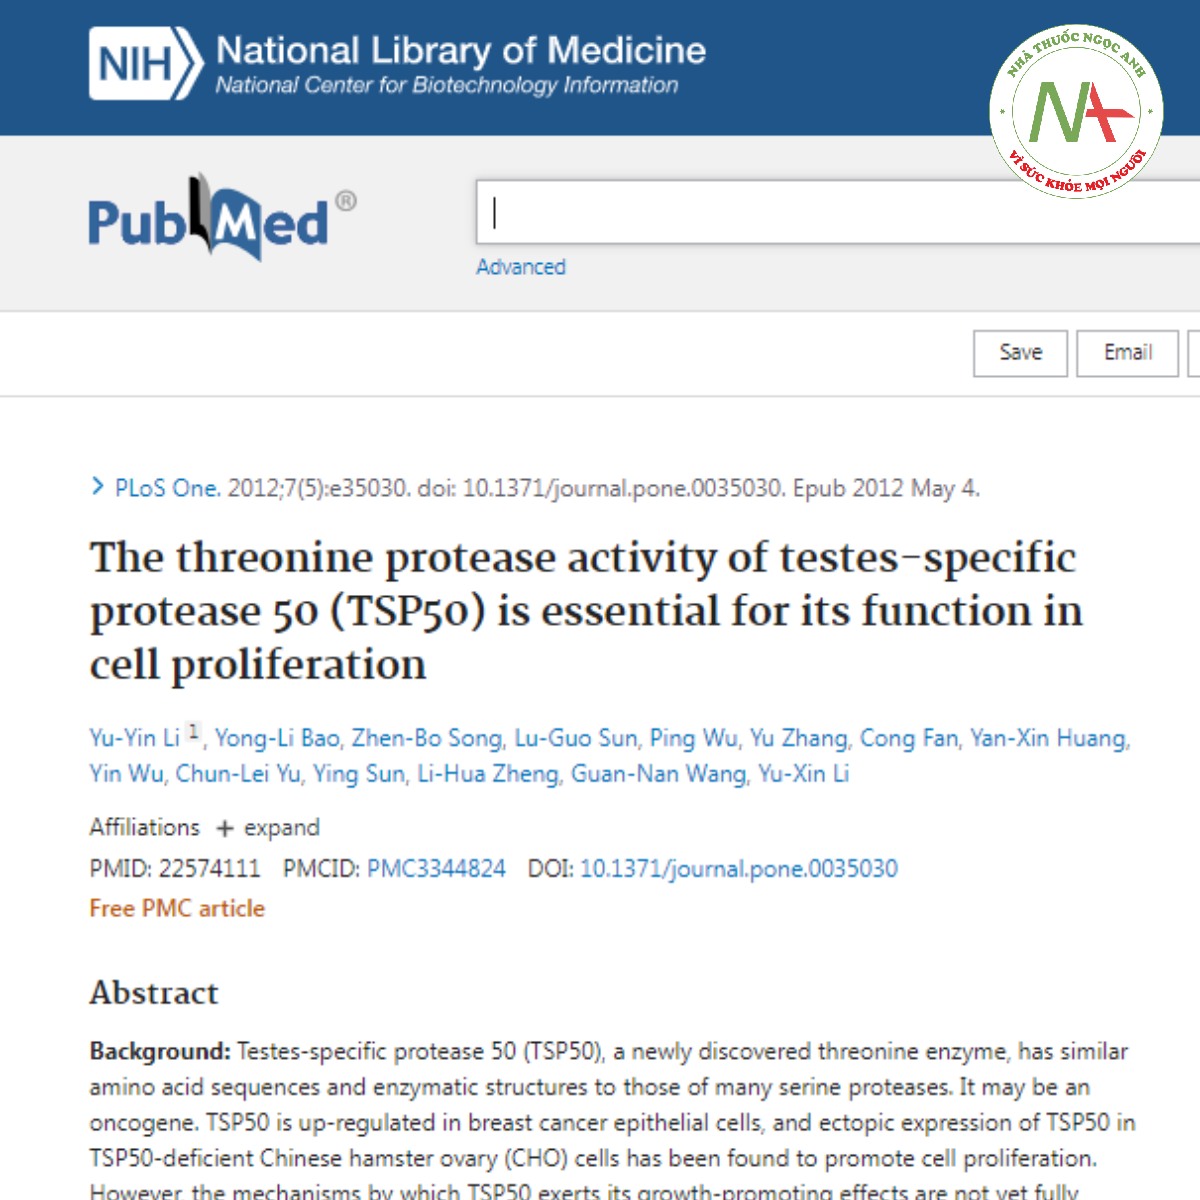 The threonine protease activity of testes-specific protease 50 (TSP50) is essential for its function in cell proliferation